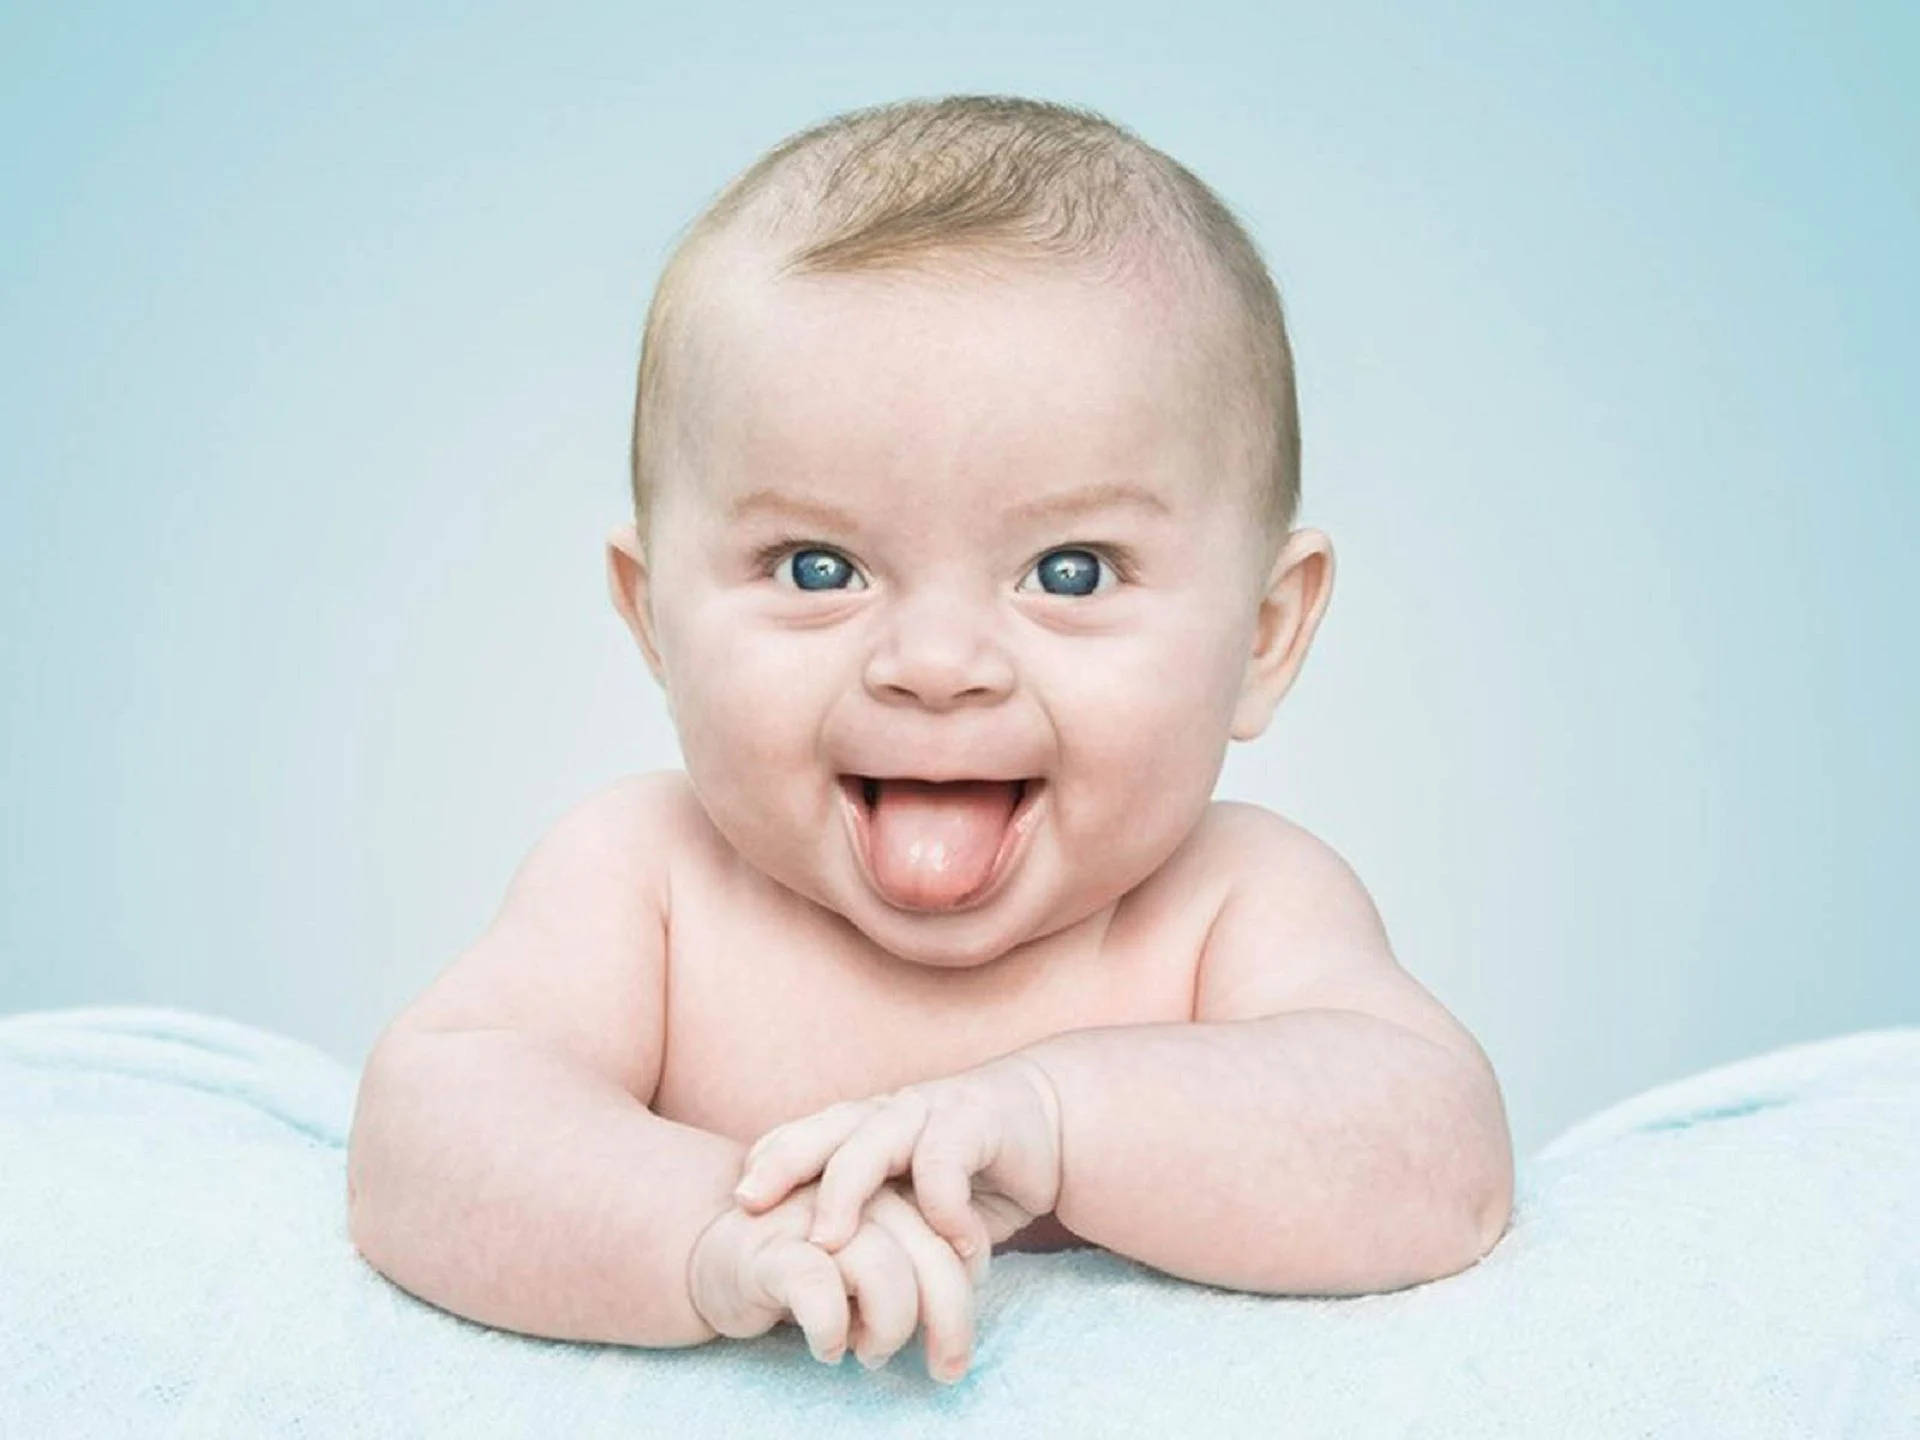 159900 Funny Baby Stock Photos Pictures  RoyaltyFree Images  iStock  Funny  baby face Funny baby expression Funny baby photos